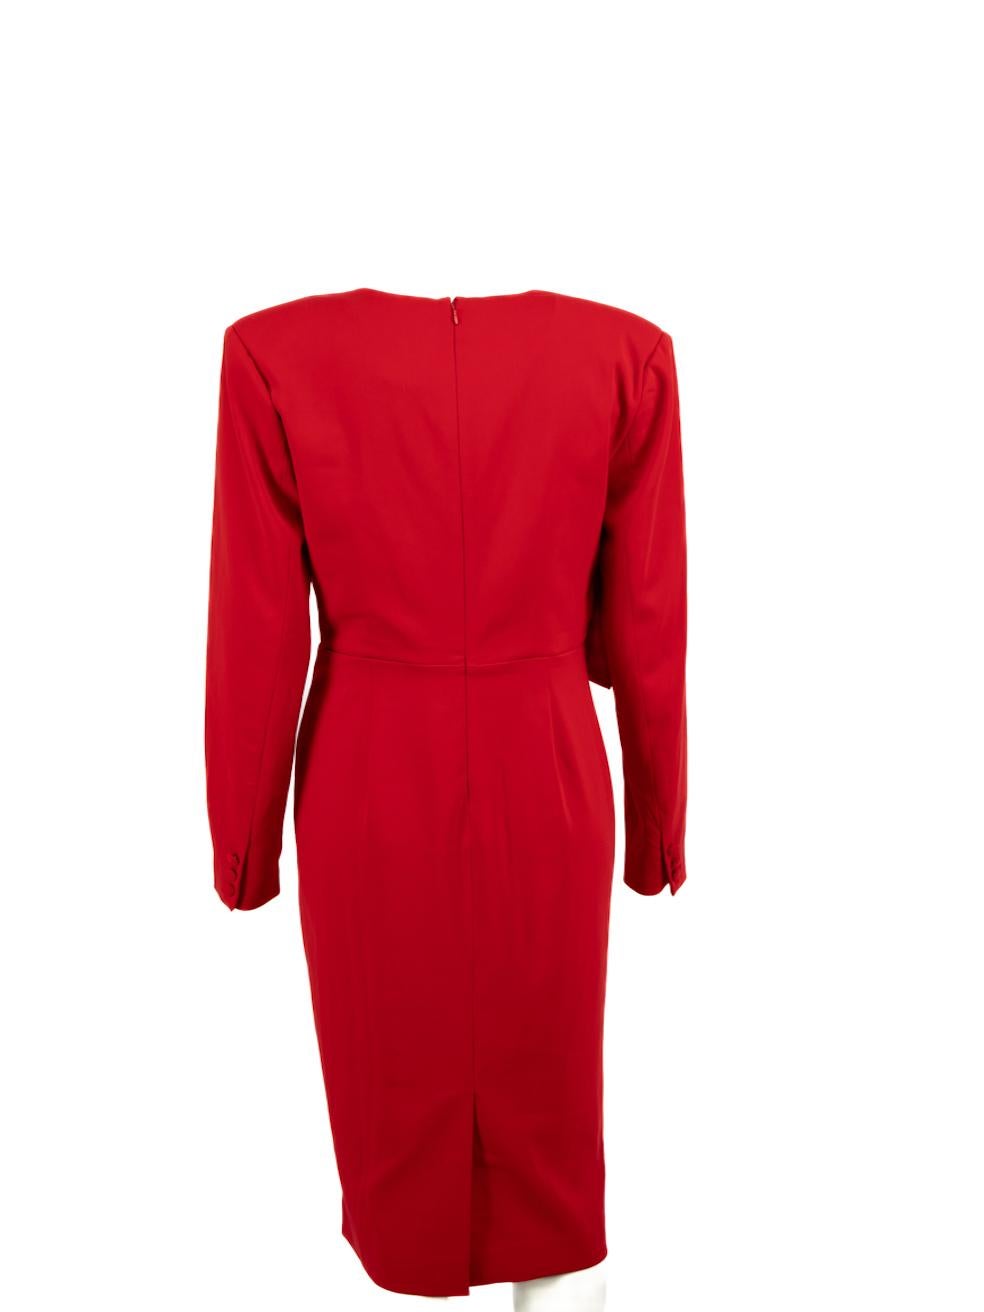 Badgley Mischka Red Shoulder Pad Knee Length Dress Size L In New Condition For Sale In London, GB